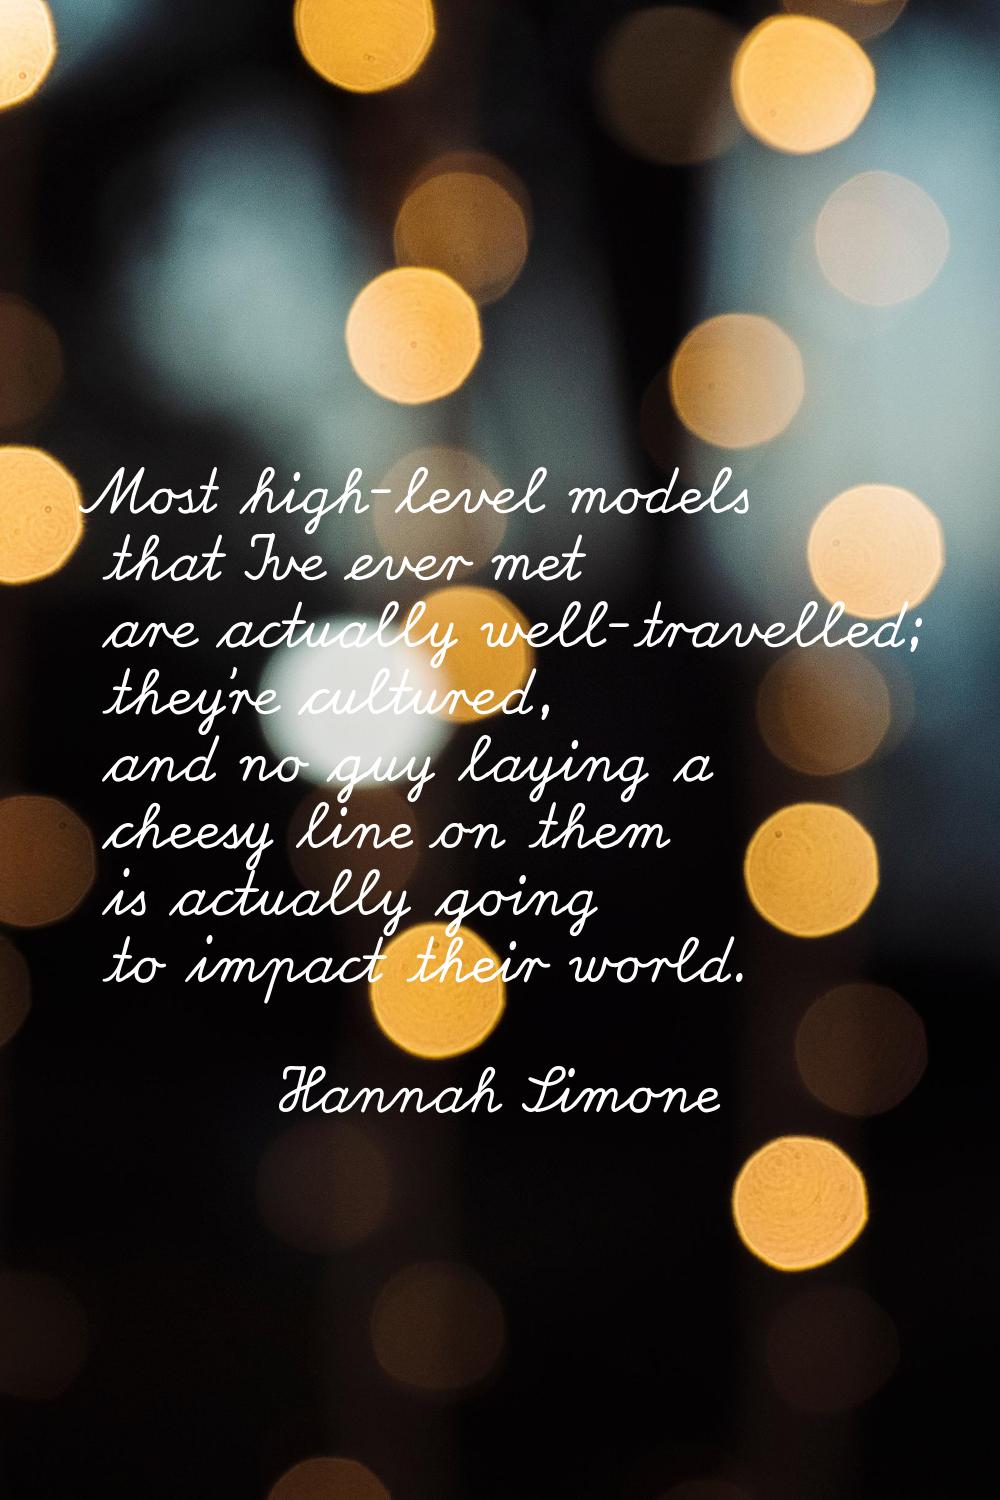 Most high-level models that I've ever met are actually well-travelled; they're cultured, and no guy